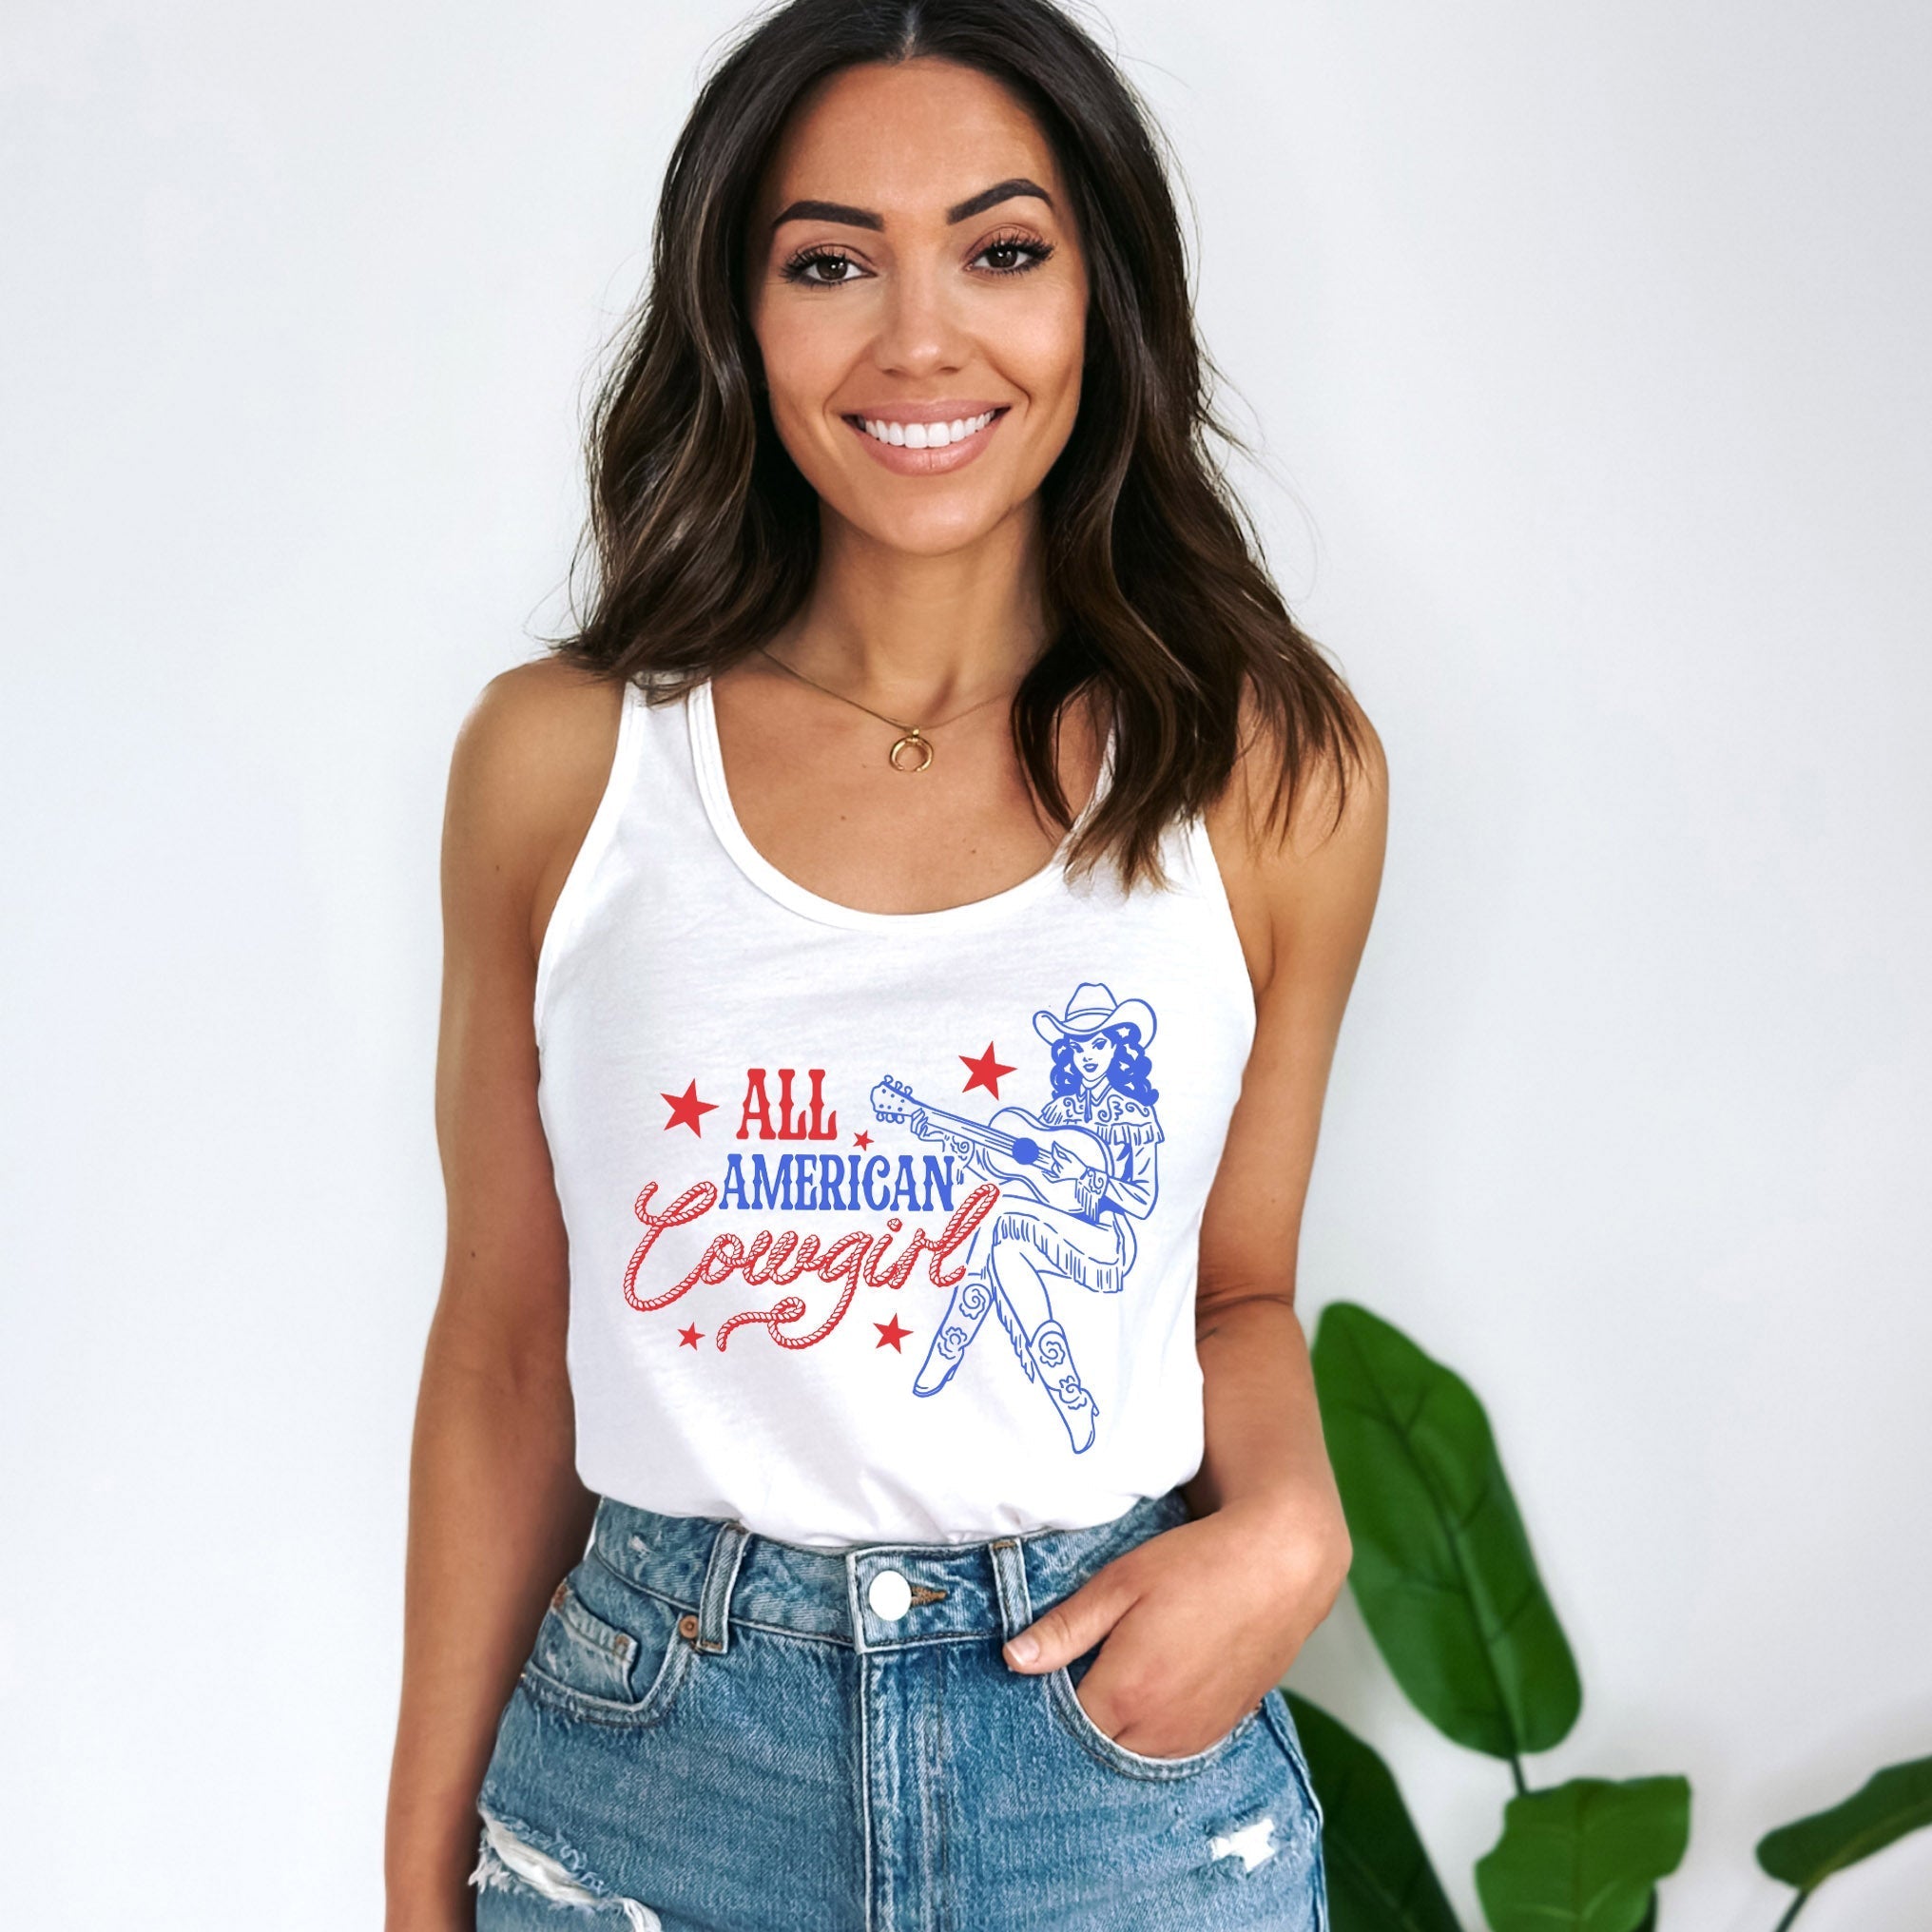 All American Cowgirl | Racerback Tank Olive and Ivory Retail